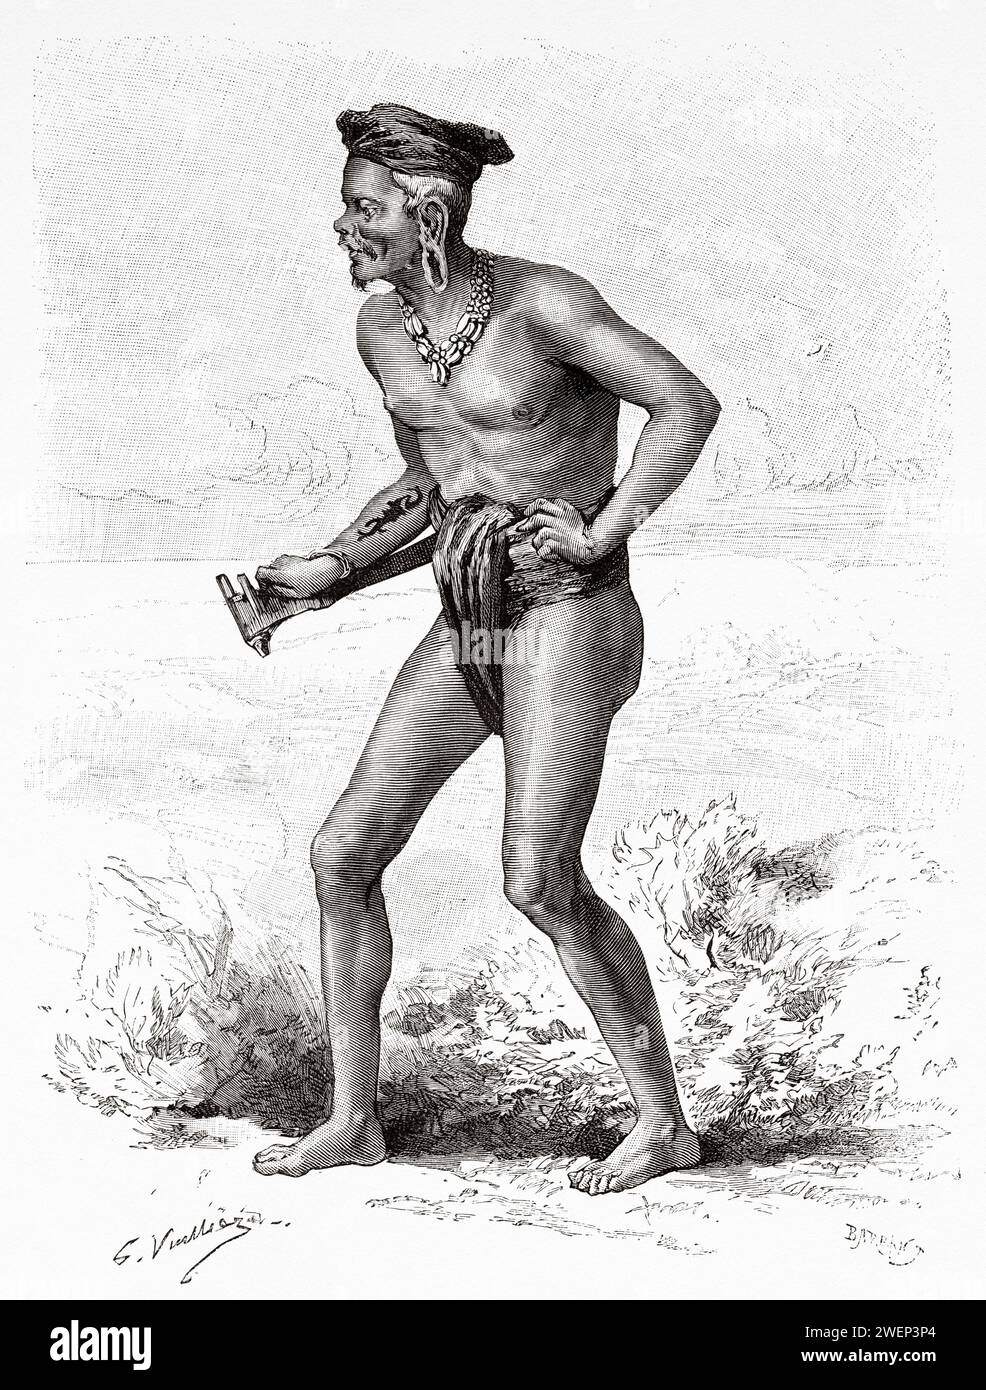 Sibau Mobang, Chief of the Cannibals, Kalimantan. Borneo Island, Indonesia. From Koutei to Banjarmasin, a journey through Borneo by Carl Bock (1849 - 1932) Stock Photo